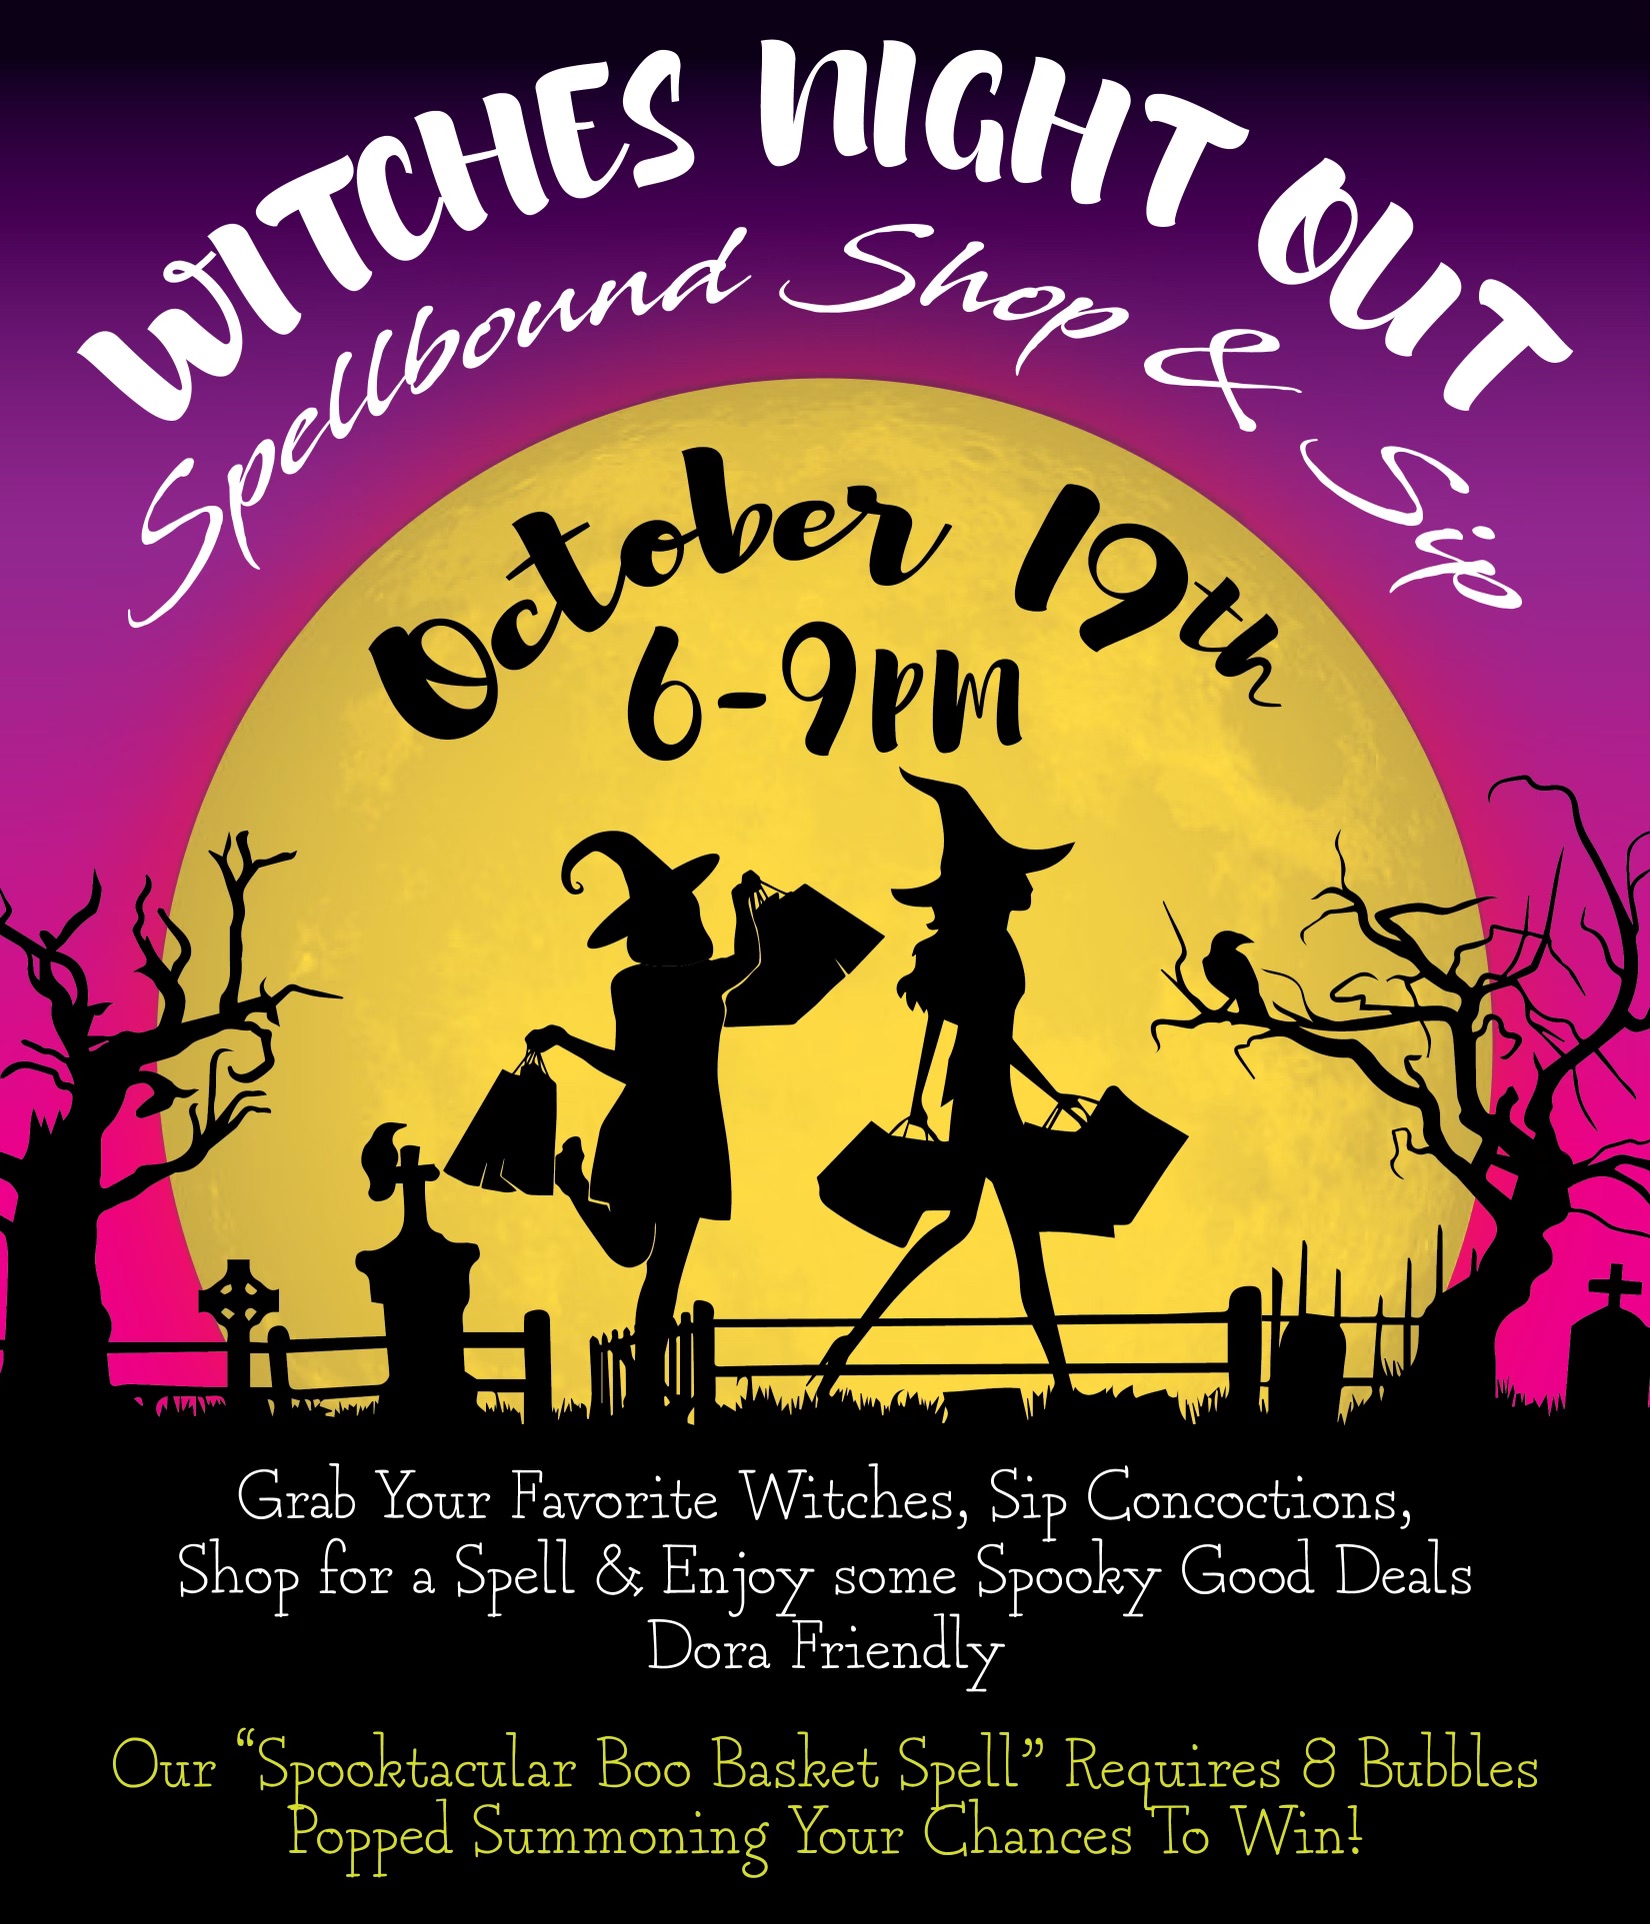 Witches Night Out